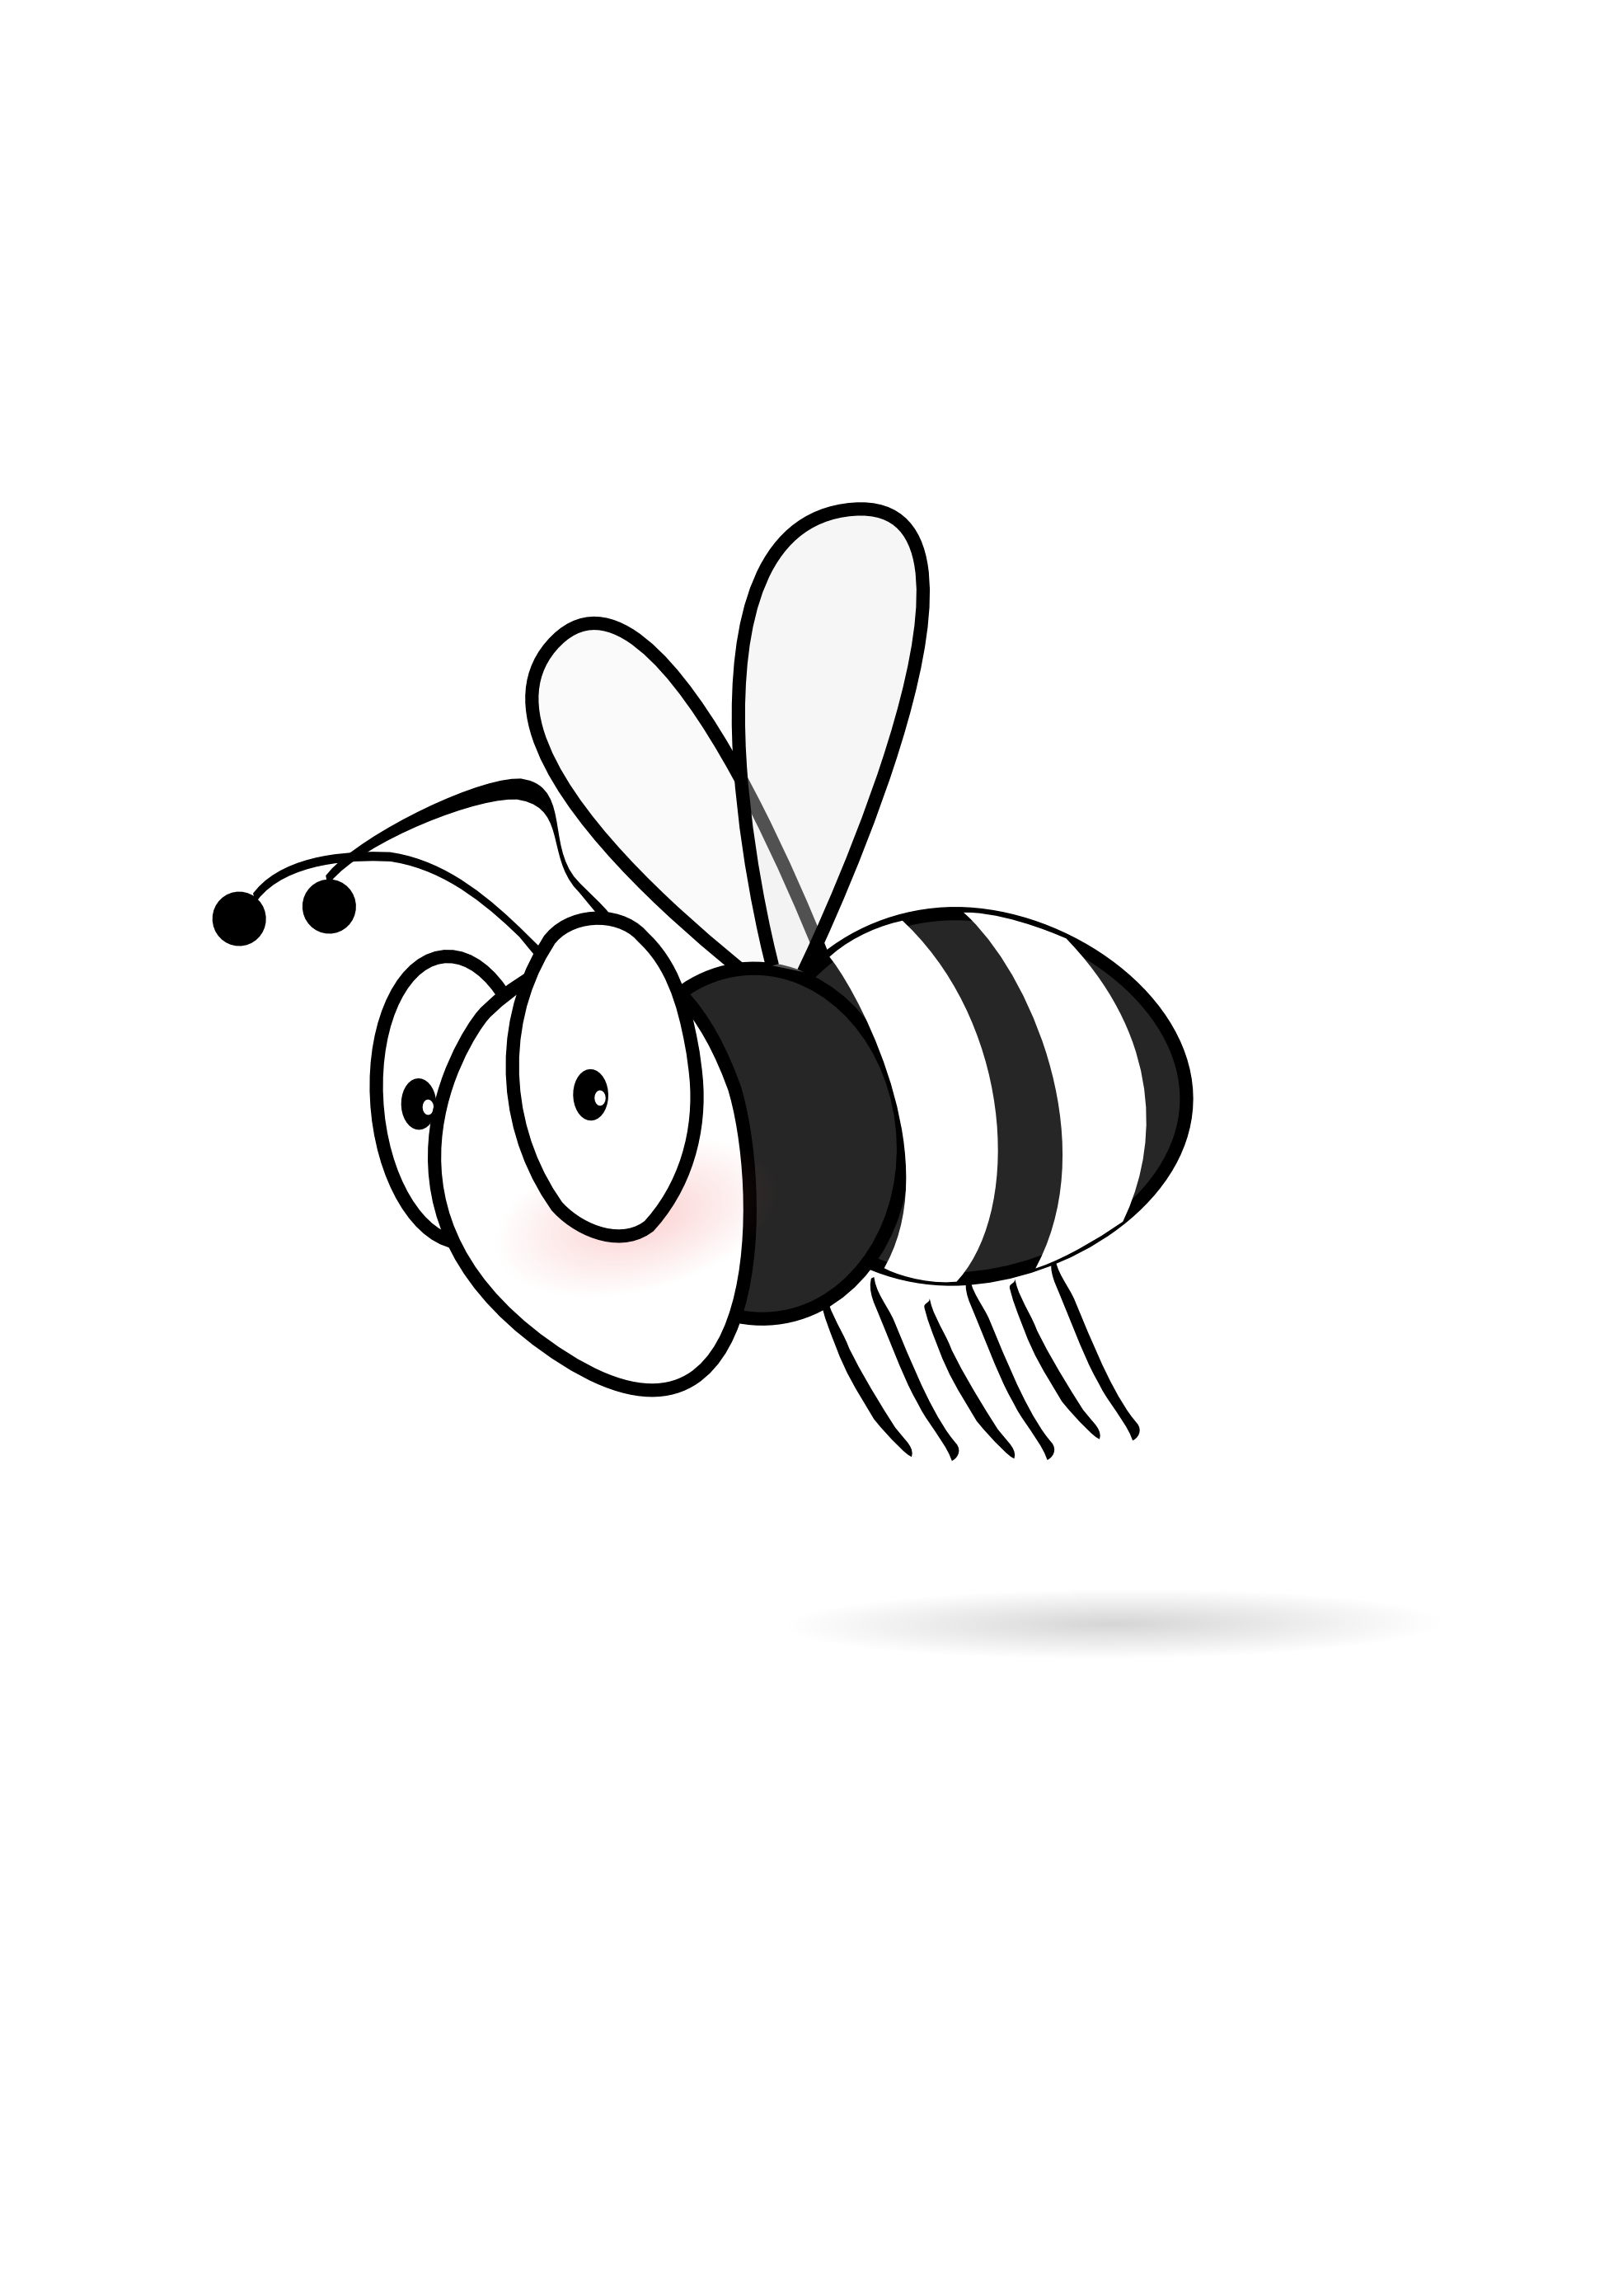 Cute Bee Clipart Black And White | Clipart Panda - Free Clipart Images